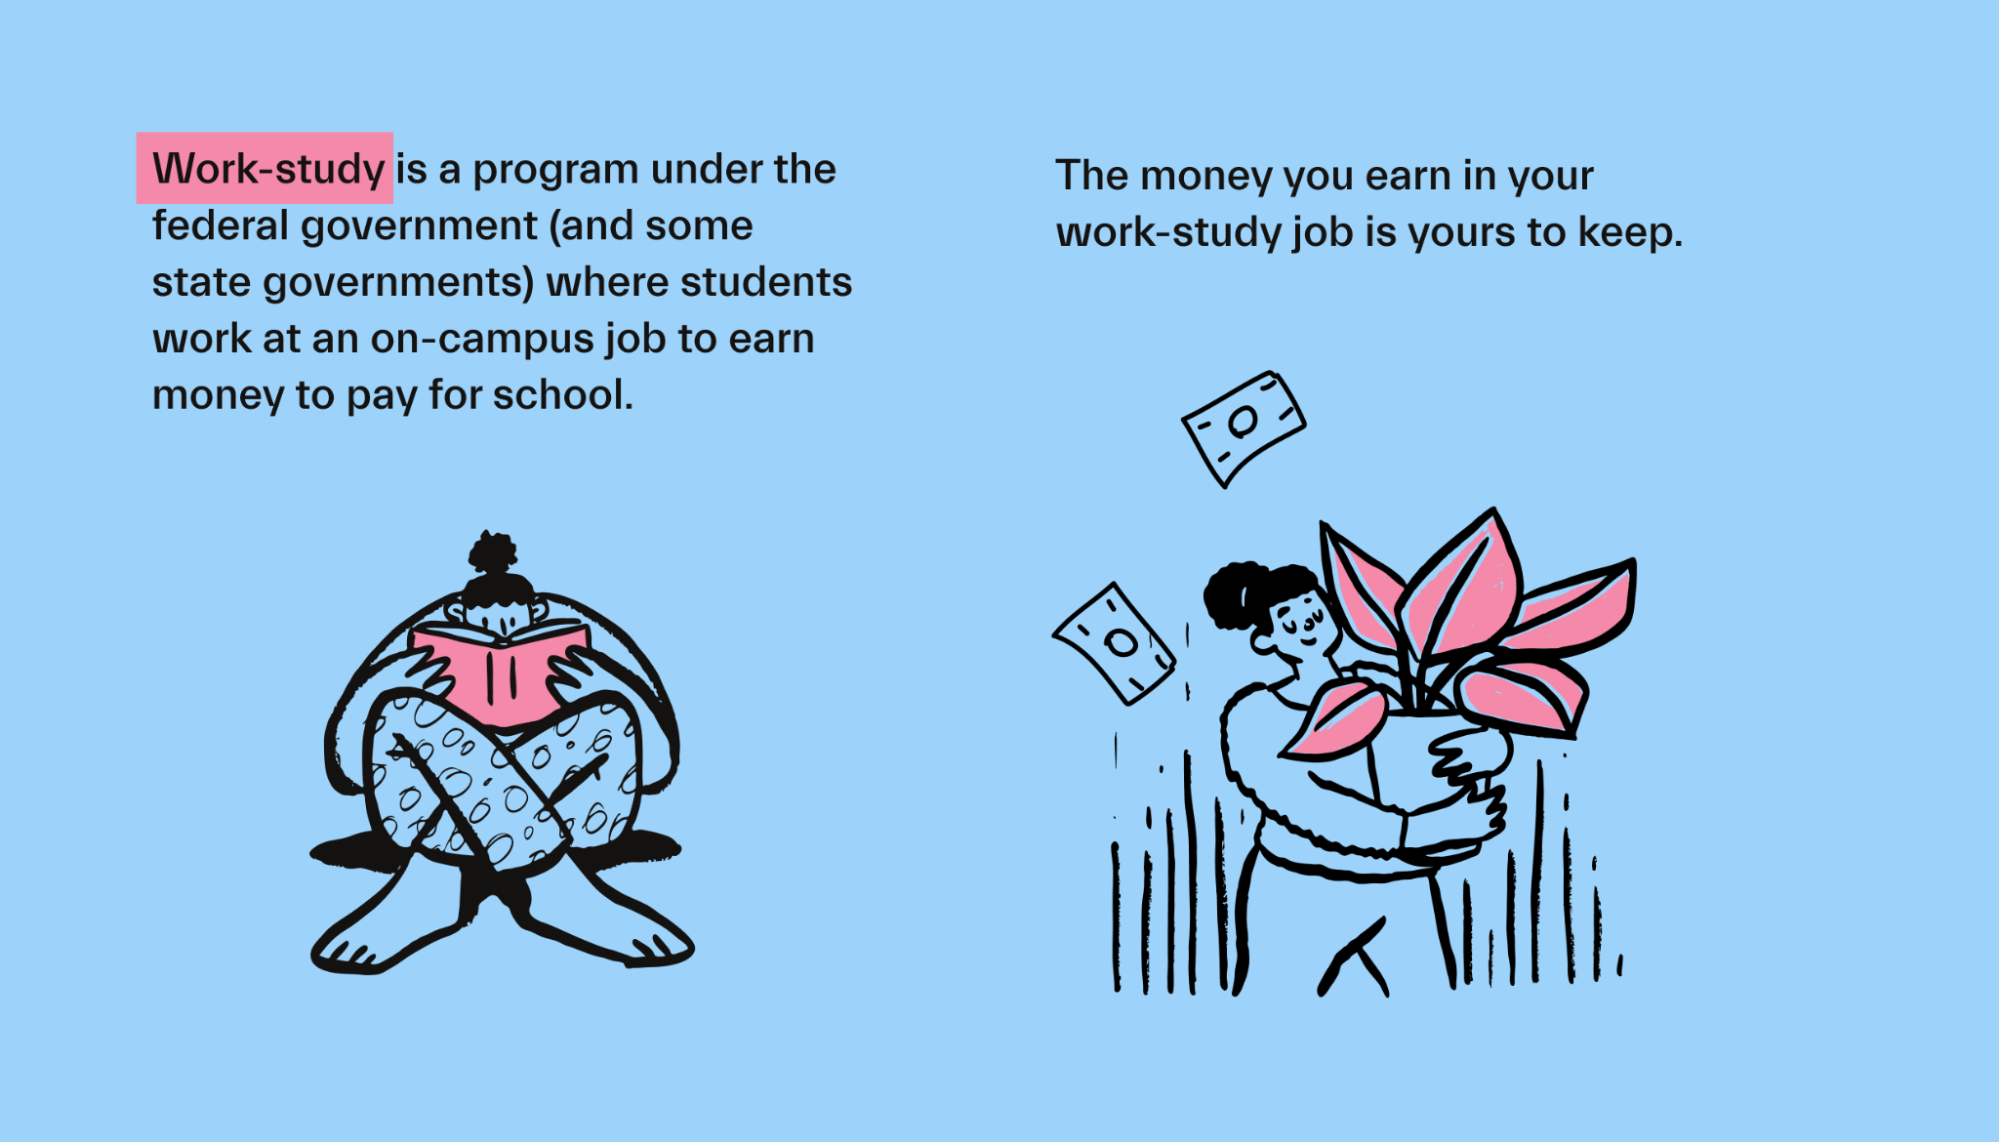 Do You Have to Repay Work-Study Income?